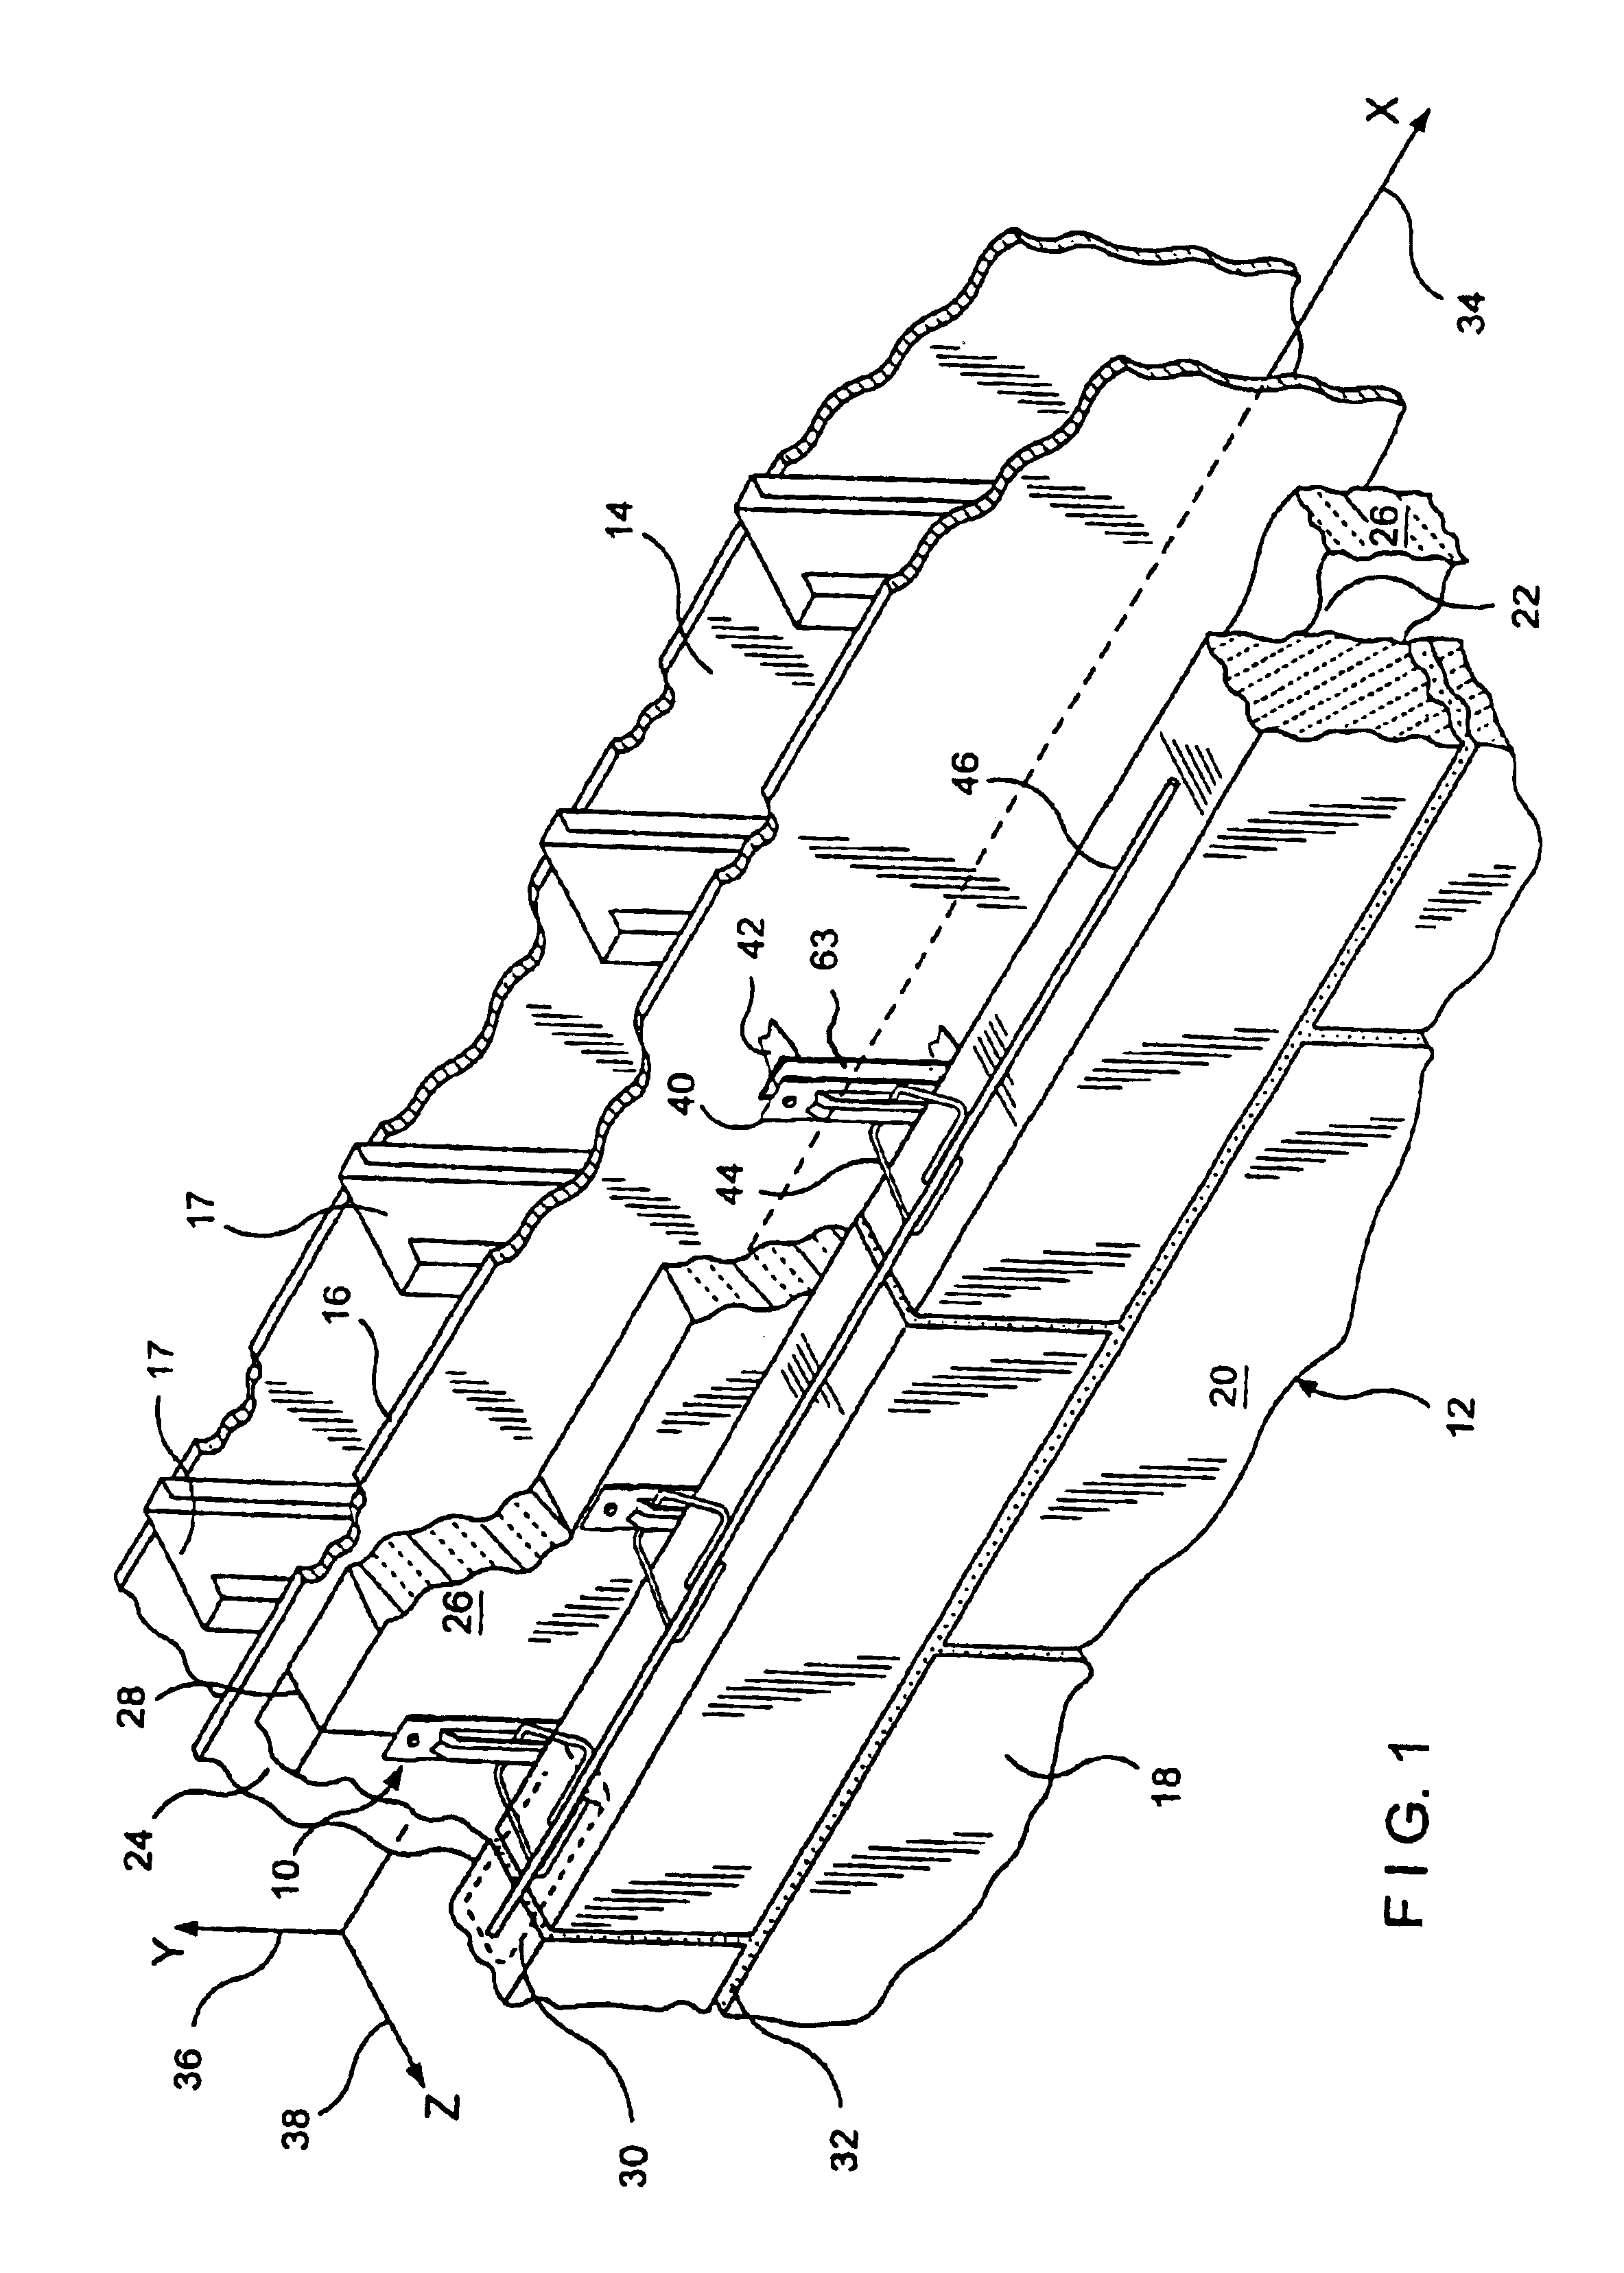 Folded wall anchor and surface-mounted anchoring